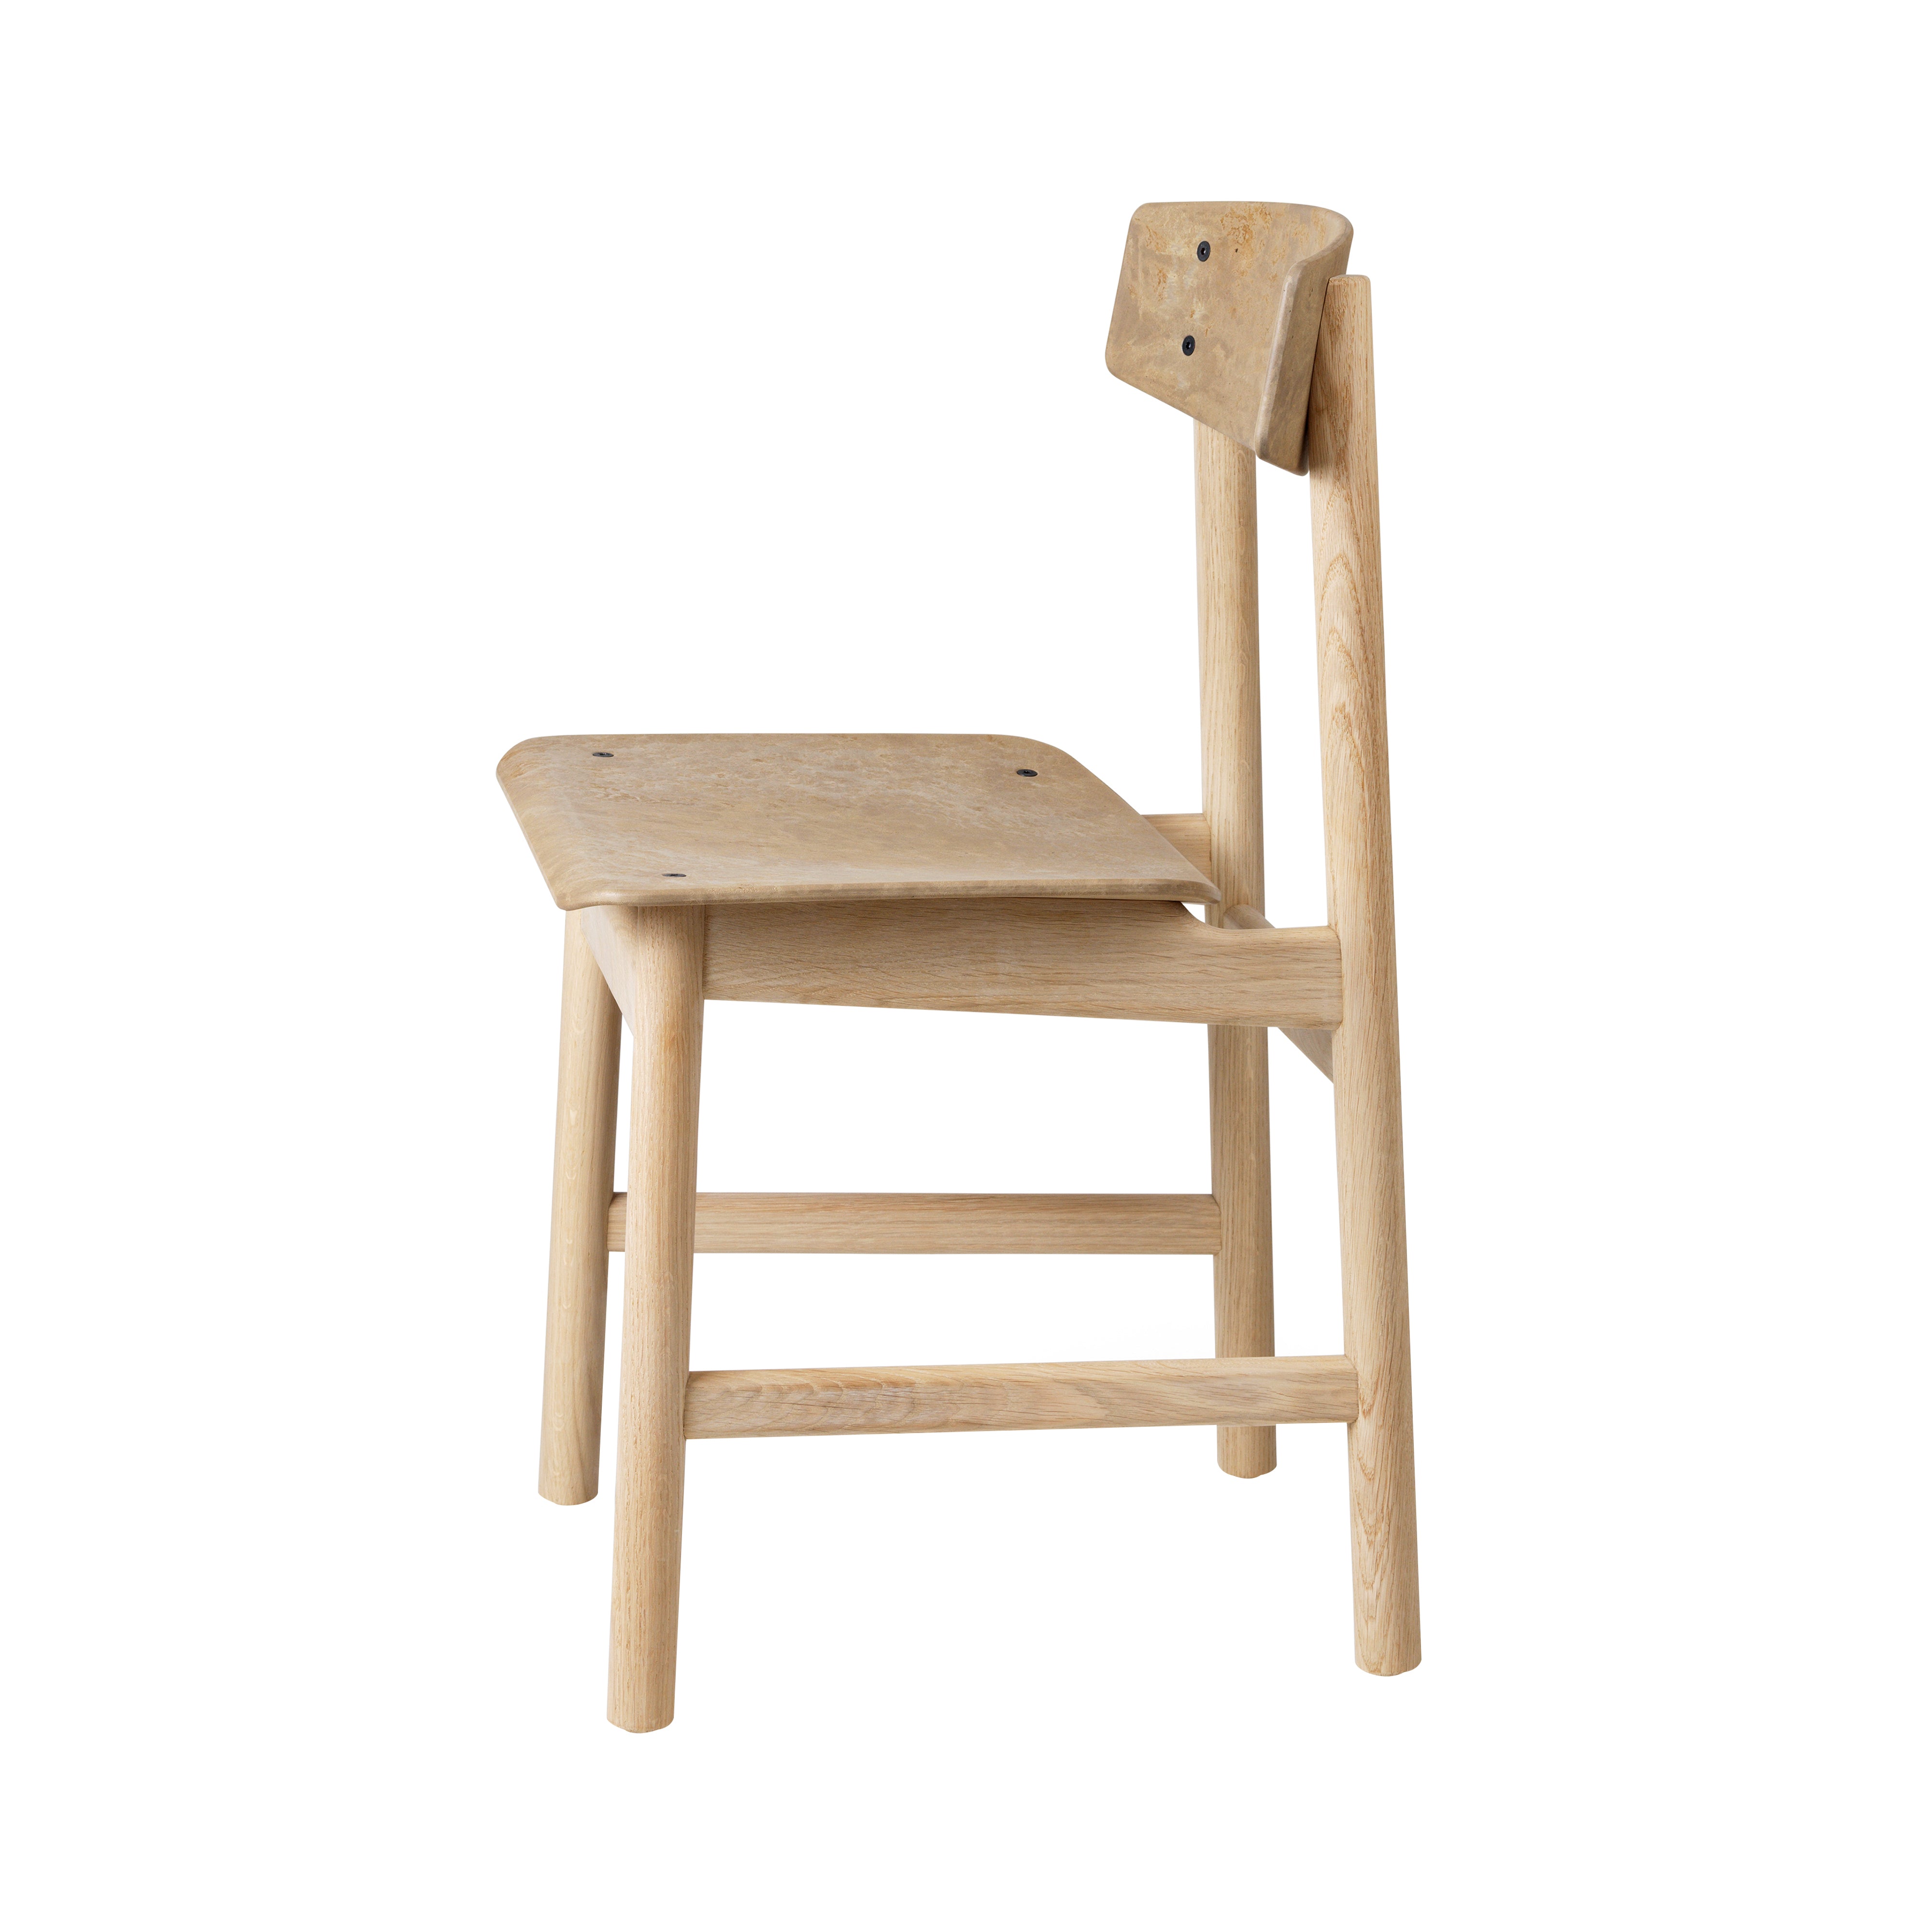 Conscious Chair 3162: Soaped Oak + Coffee Waste Light